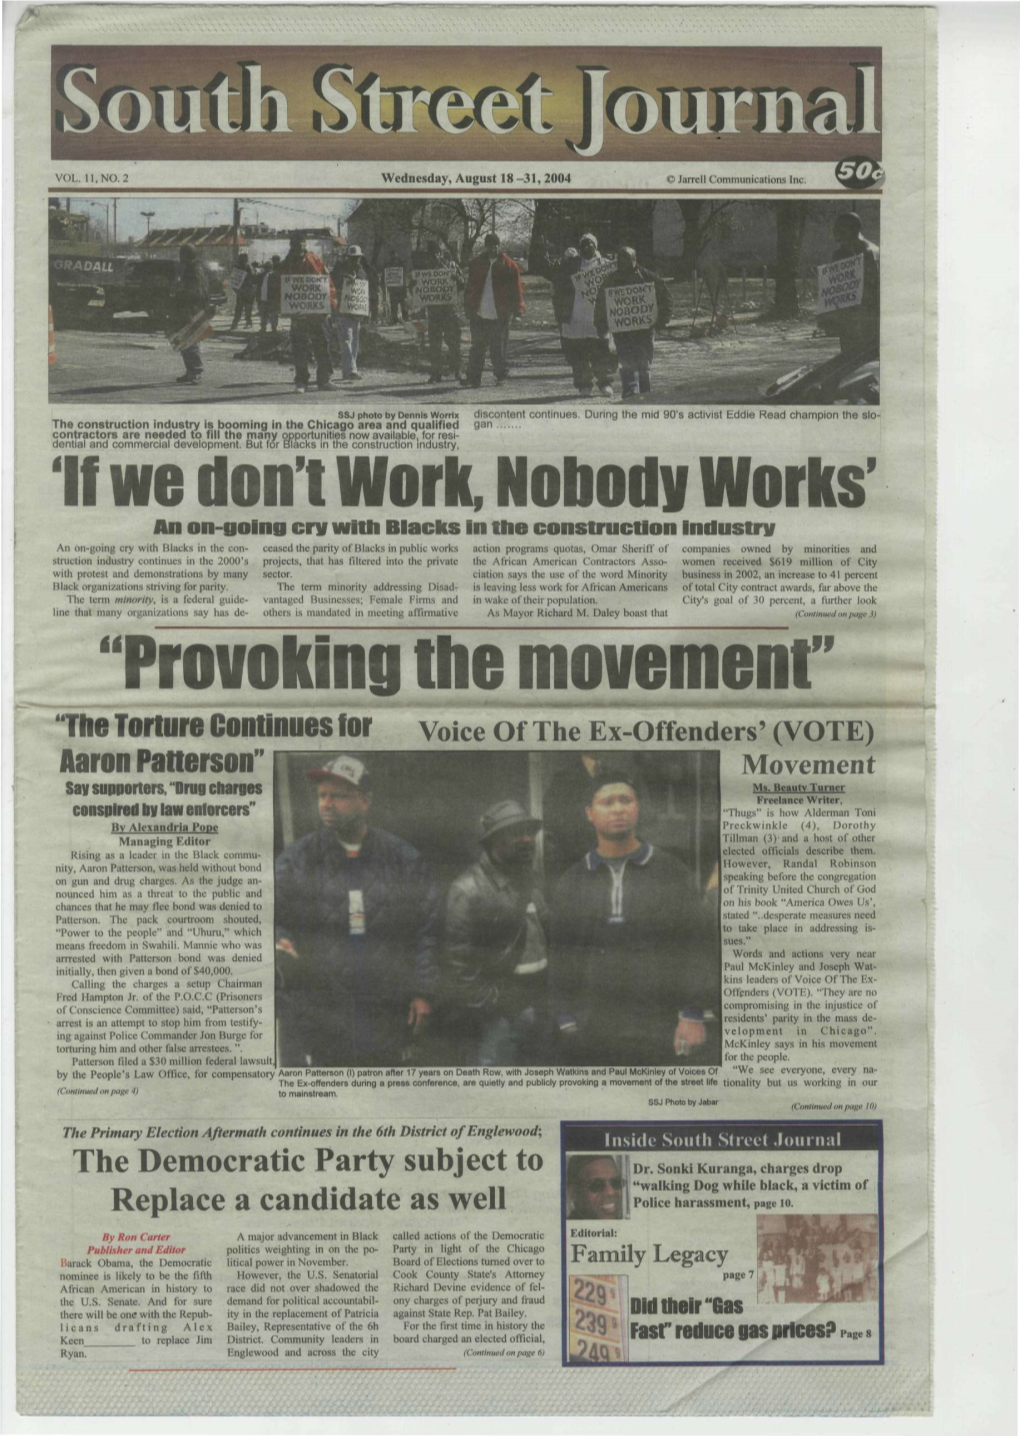 If We Don't Work, Nobody Works Provoking the Movement"